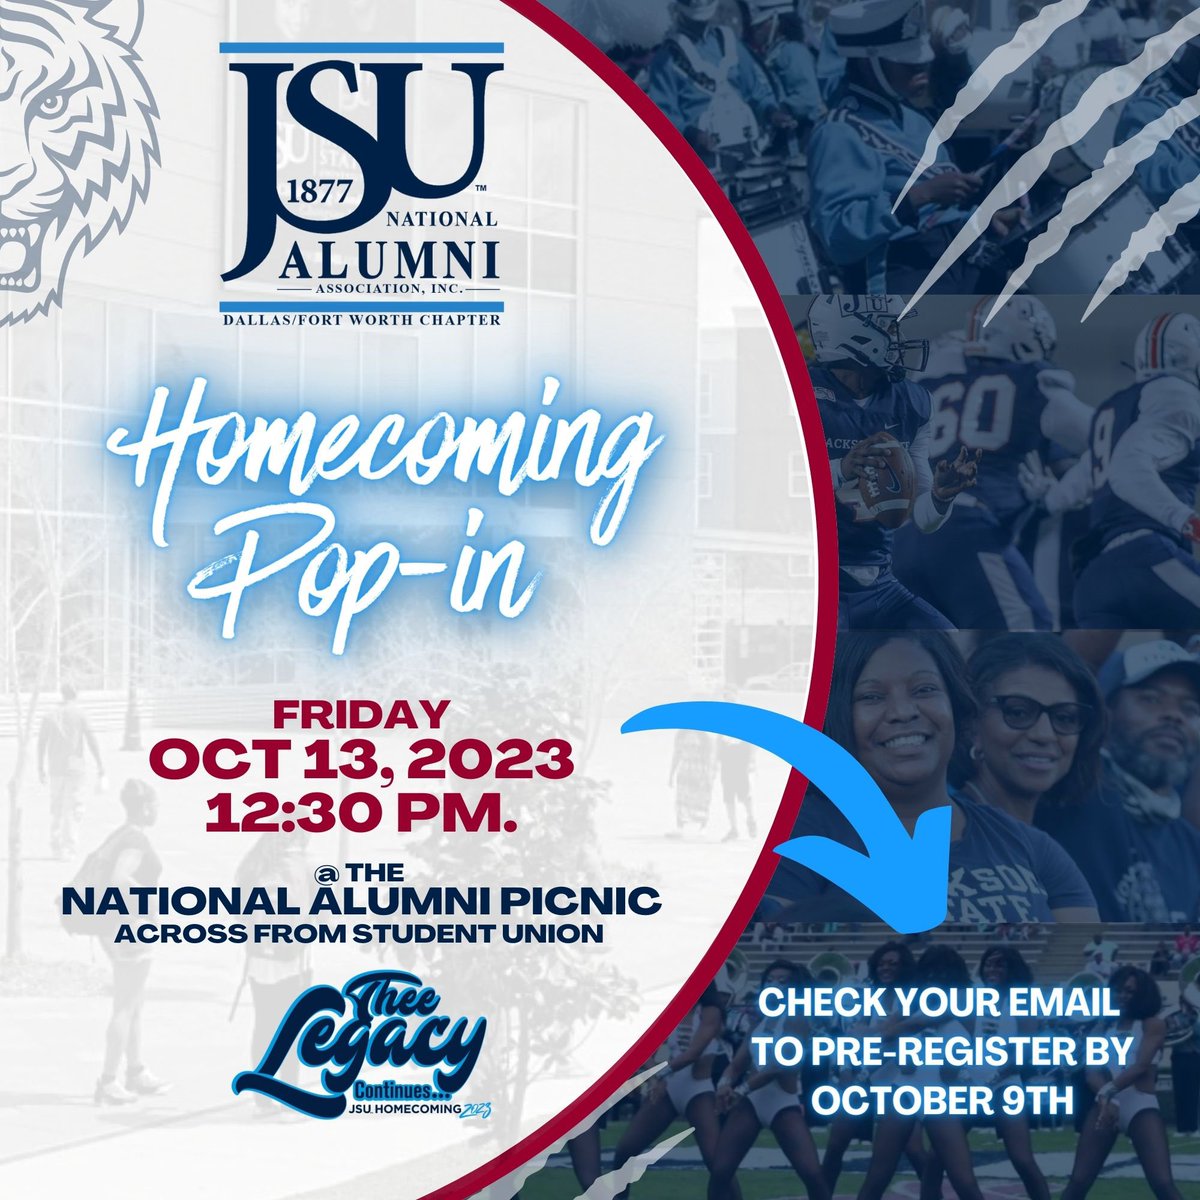 Attention all DFW students!!! We are pulling up to campus on Friday the 13th. Please check your email for confirmation details. If you have any questions kindly contact us at info@dfw-jsu.org

#theeilove #jsunaadfw #jacksonstateuniversity #JSU27 #JSU26 #JSU25 #JSU24 #jsu23